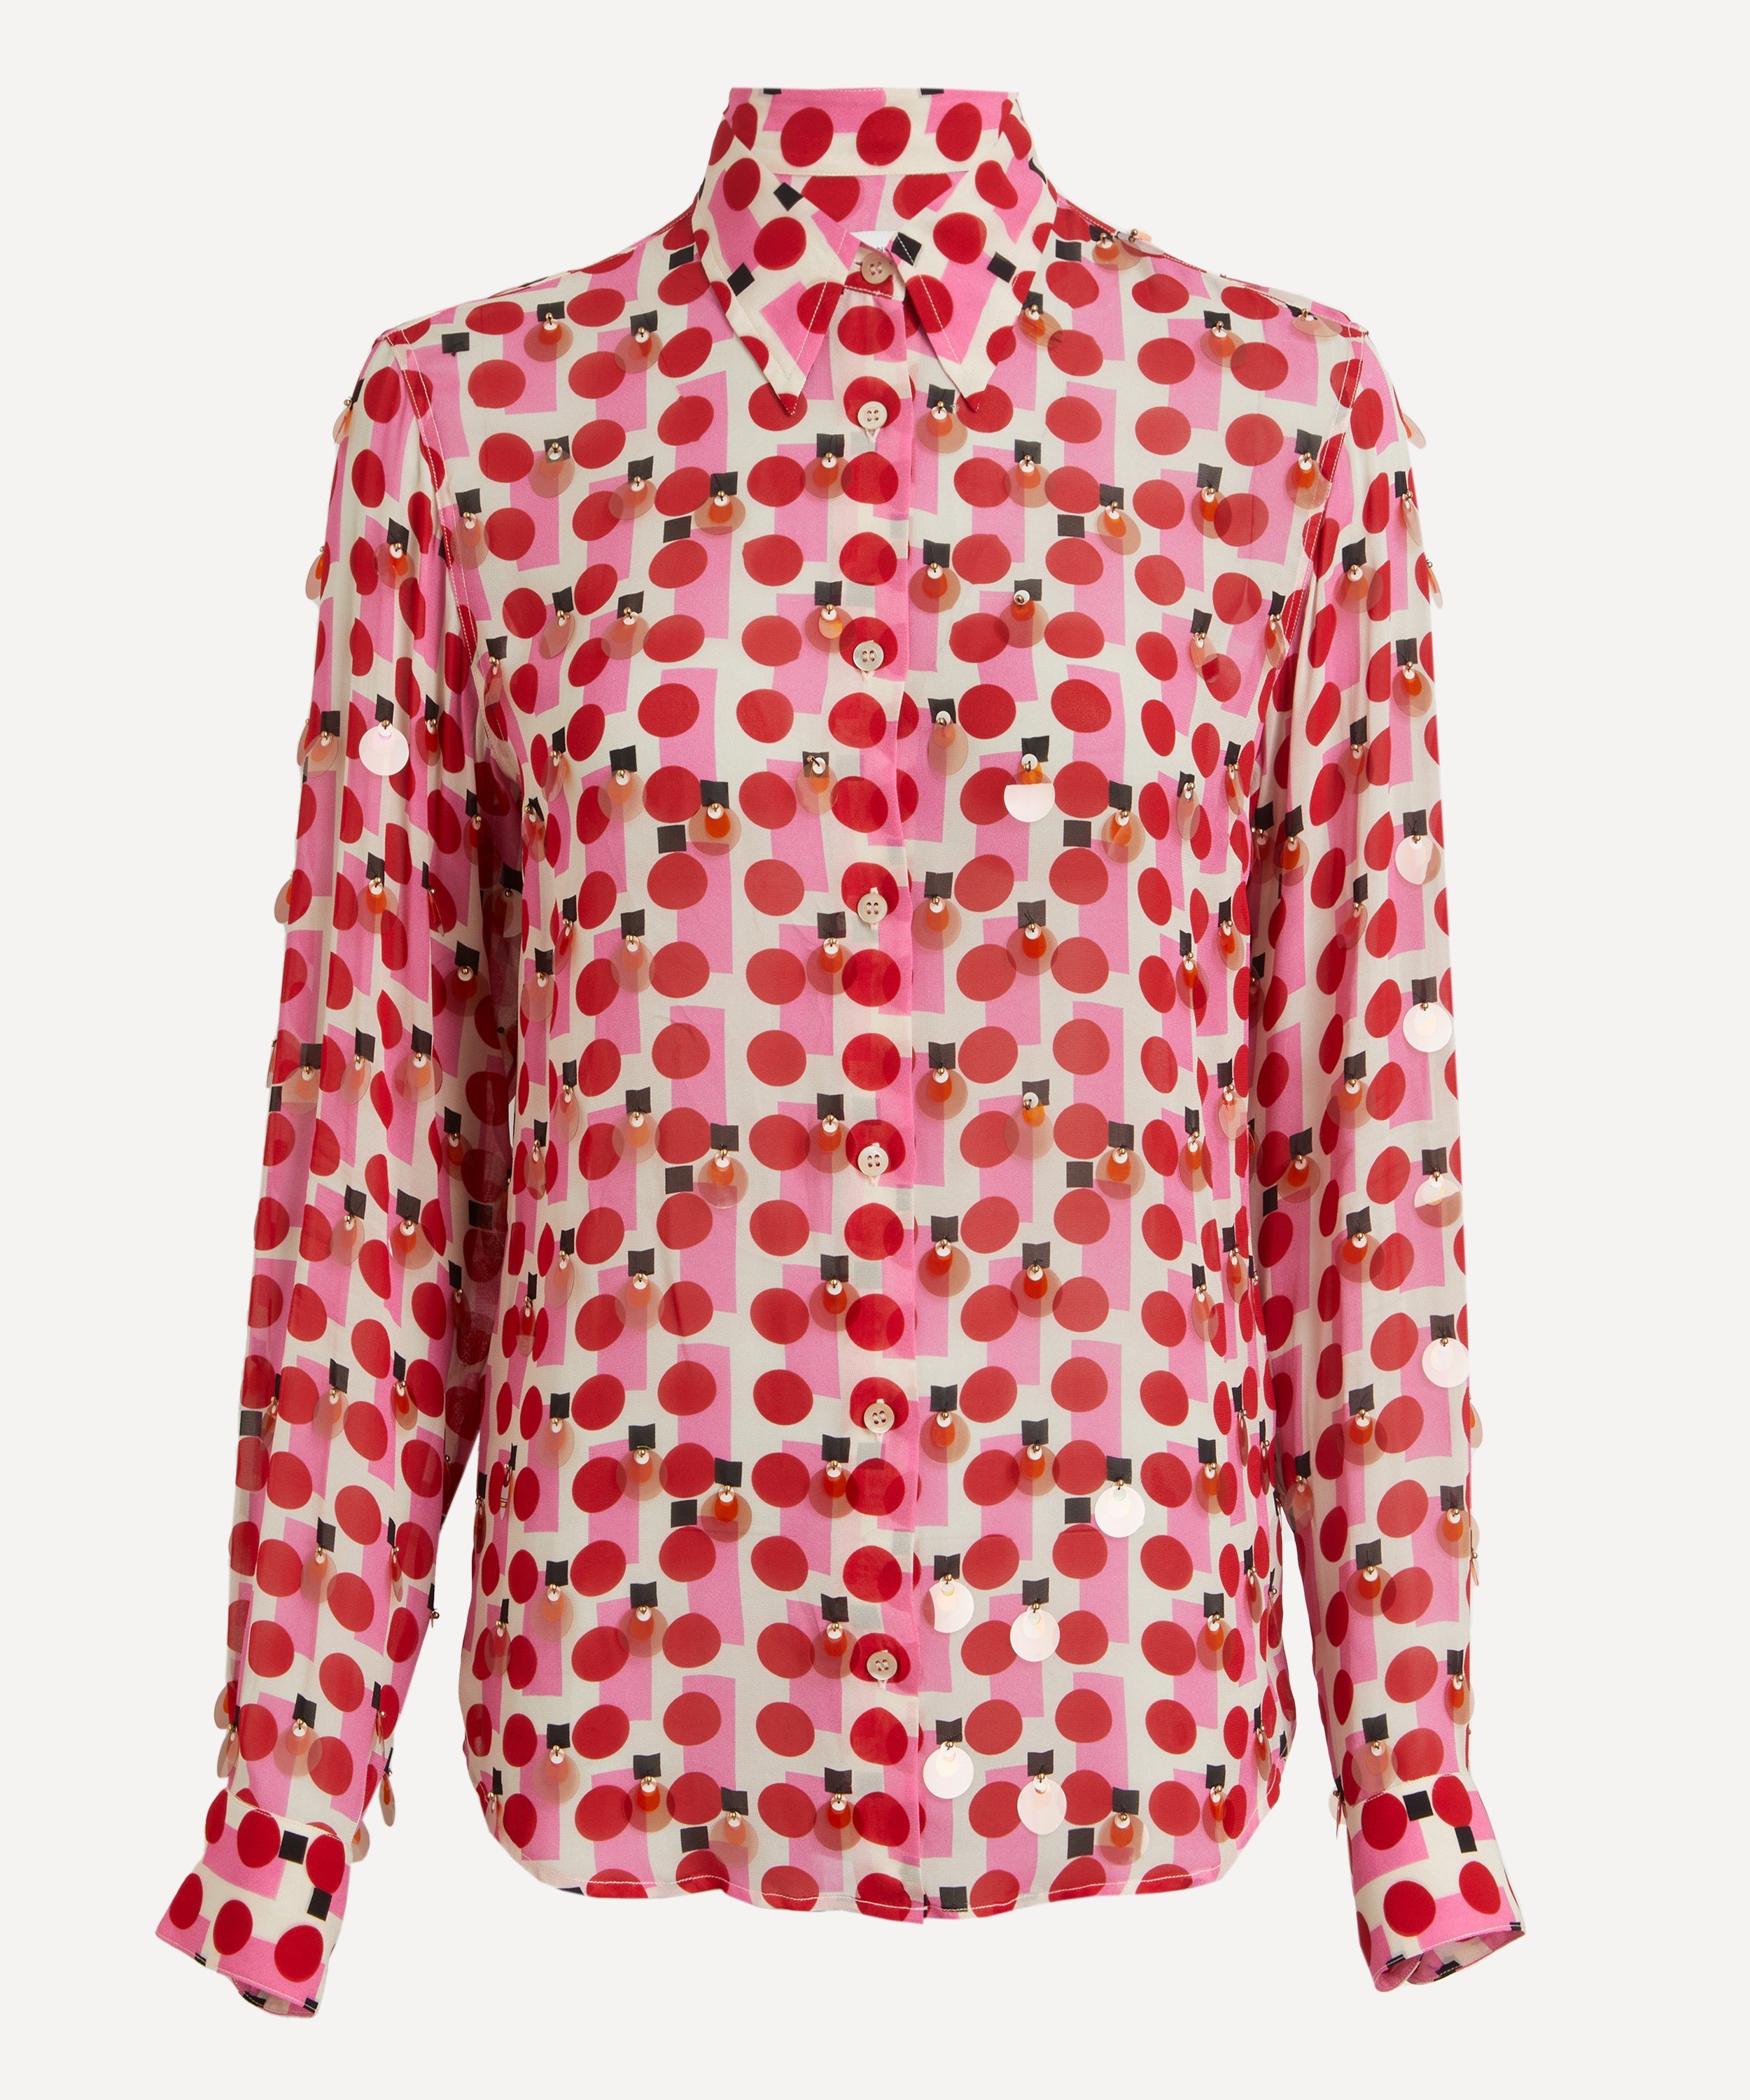 Dries Van Noten - Printed Shirt with Paillettes